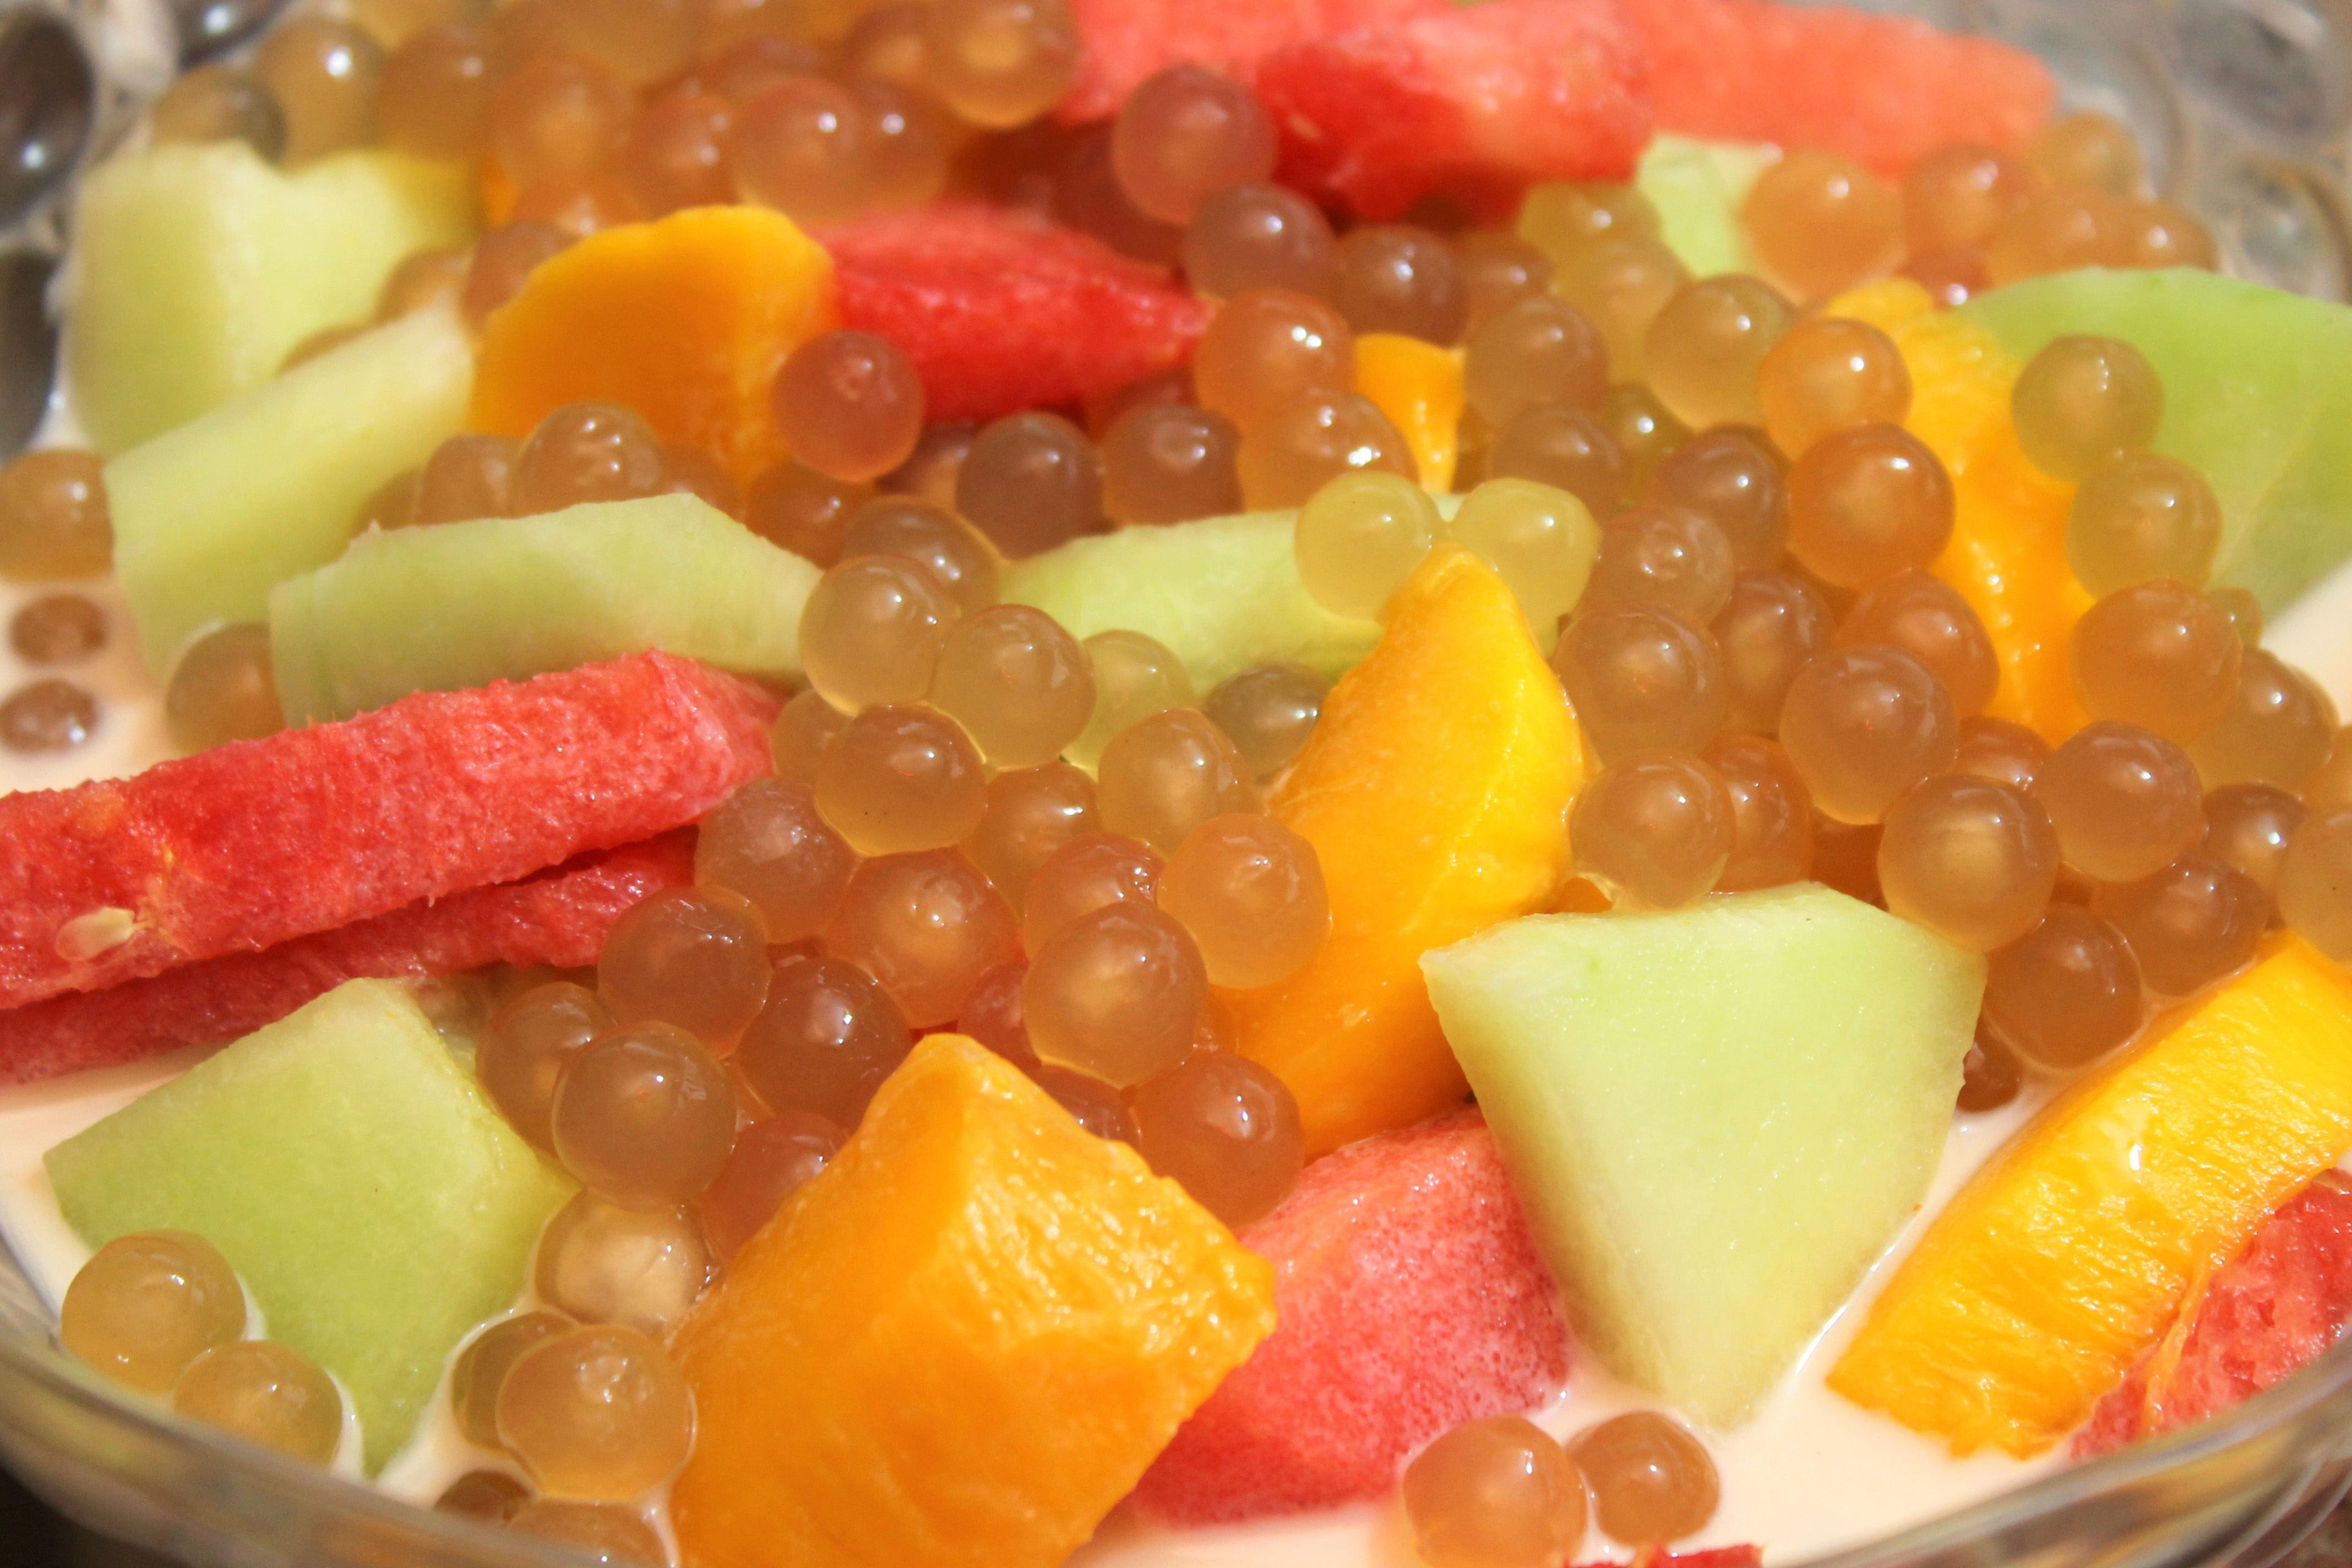 How to Make Cold Mixed Fruits Sago: 6 Steps (with Pictures)